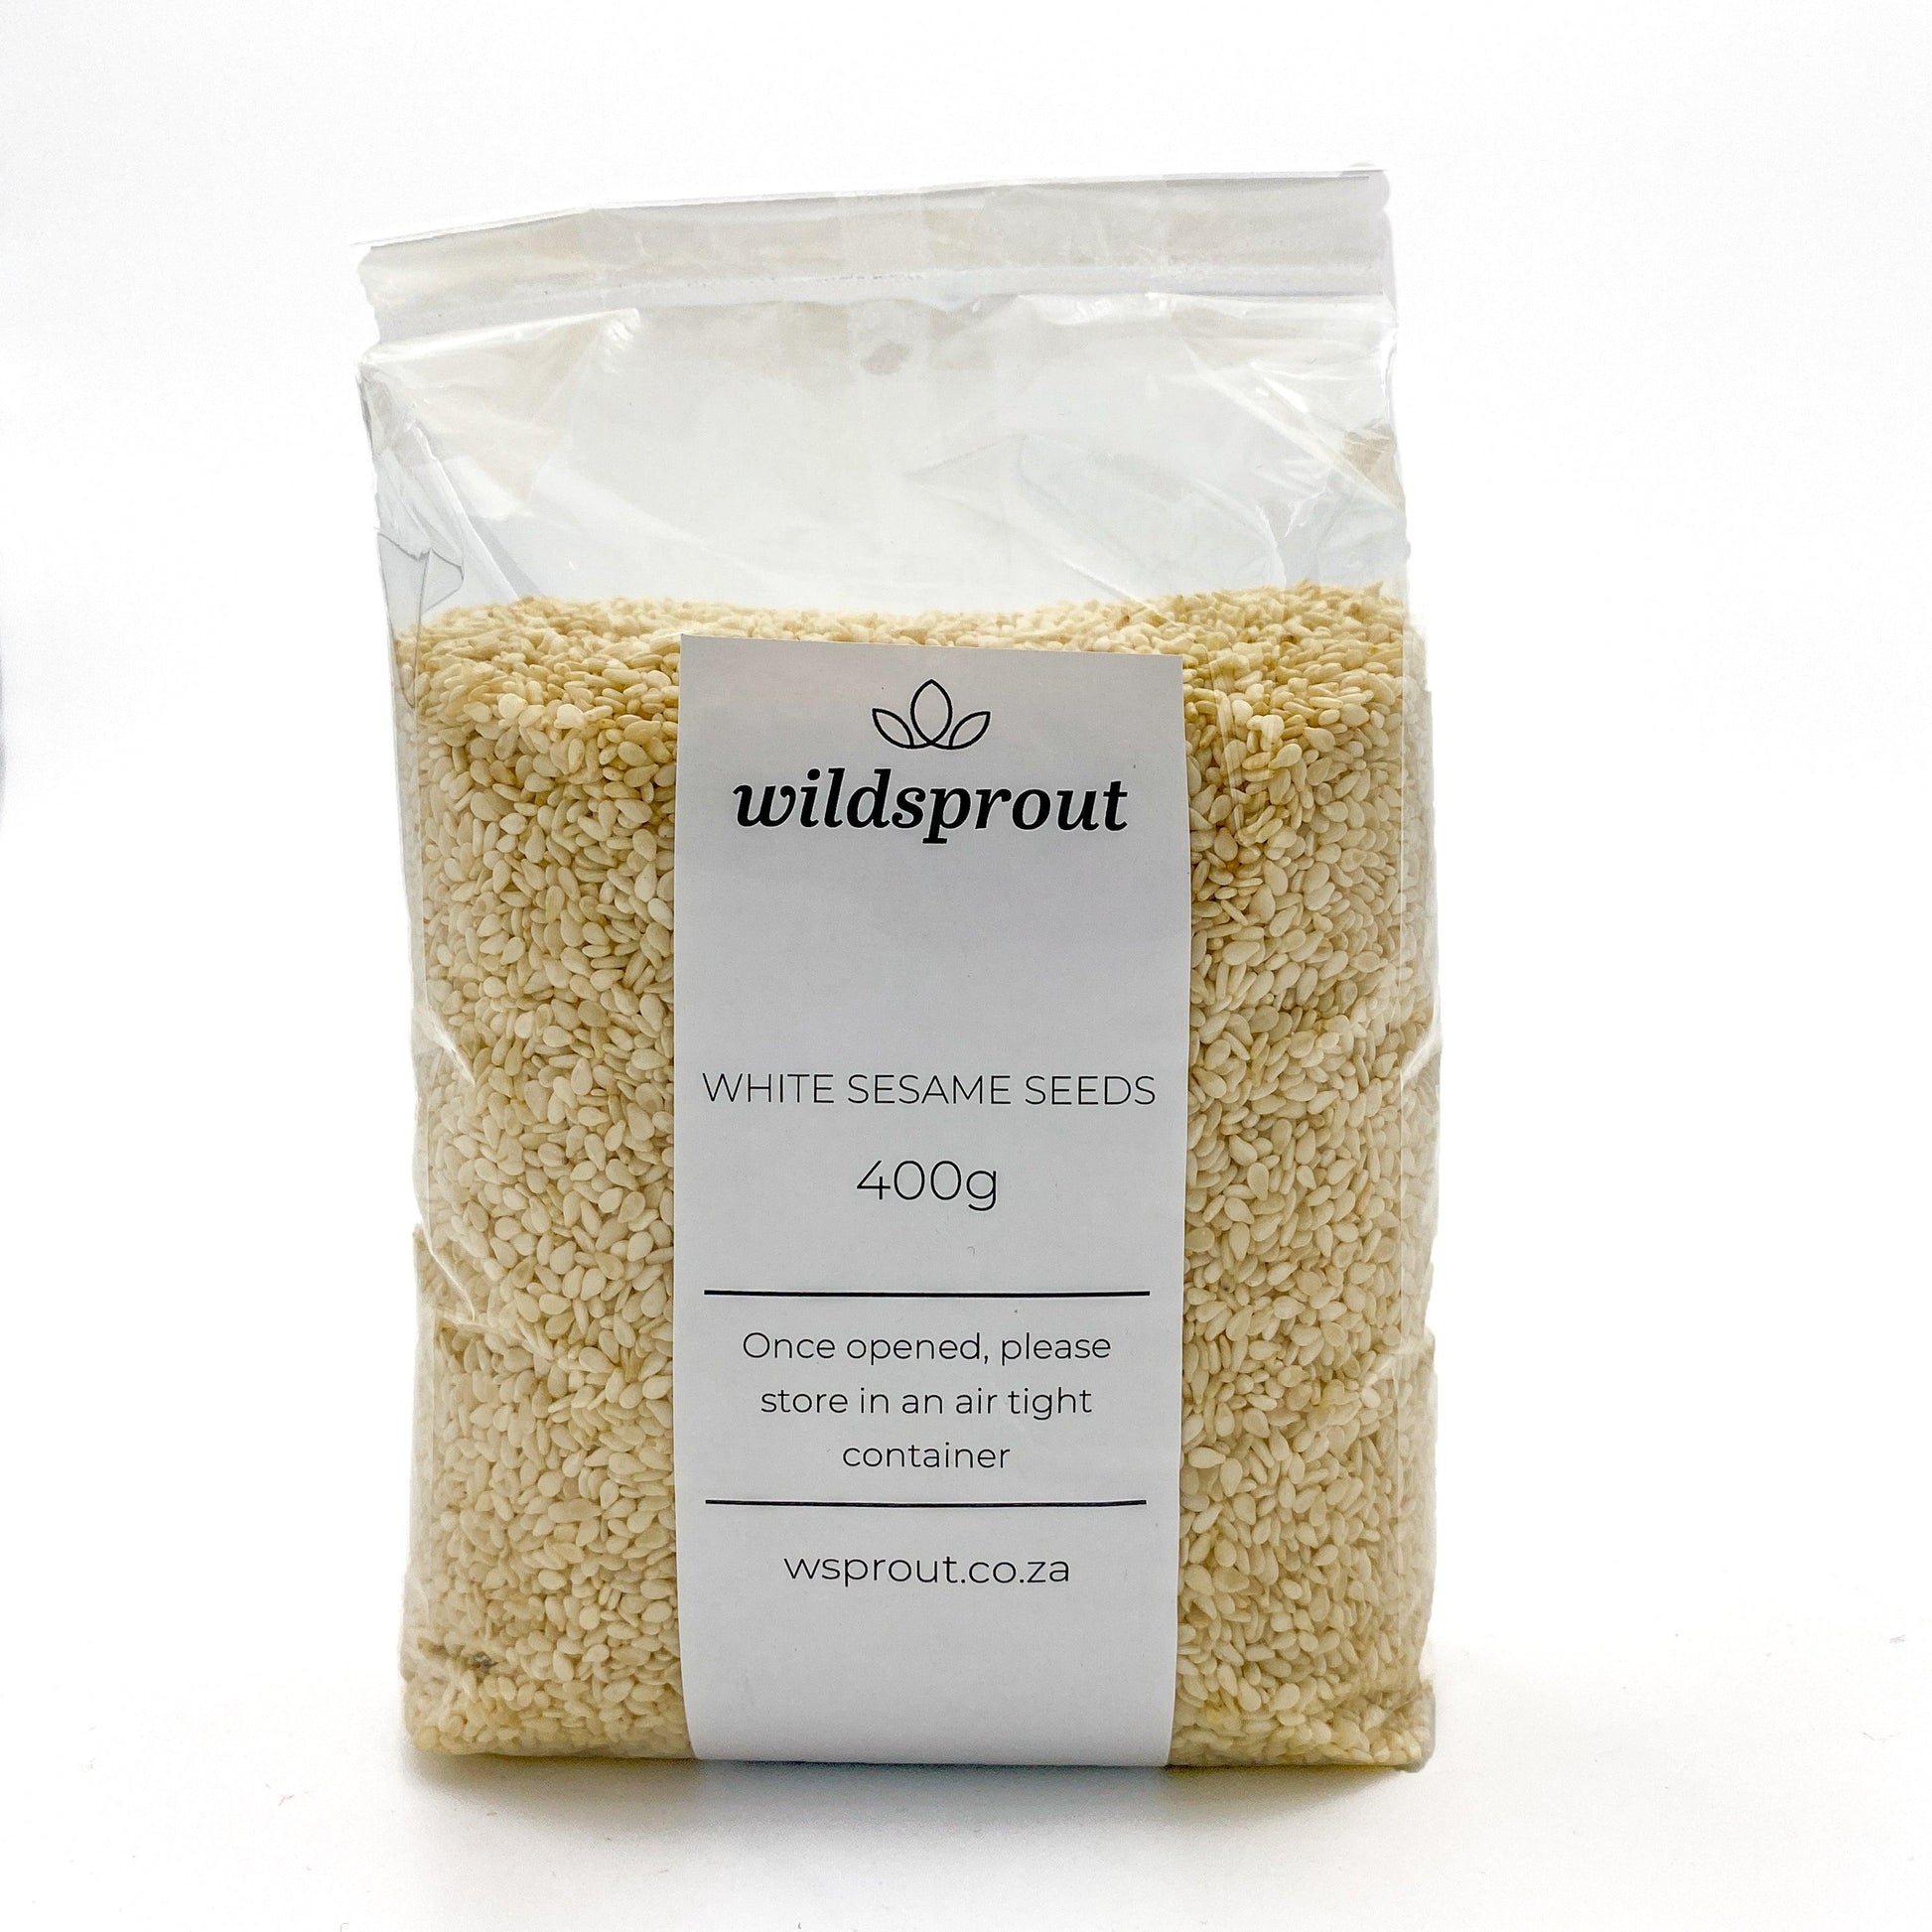 White Sesame Seeds 400g - Wildsprout